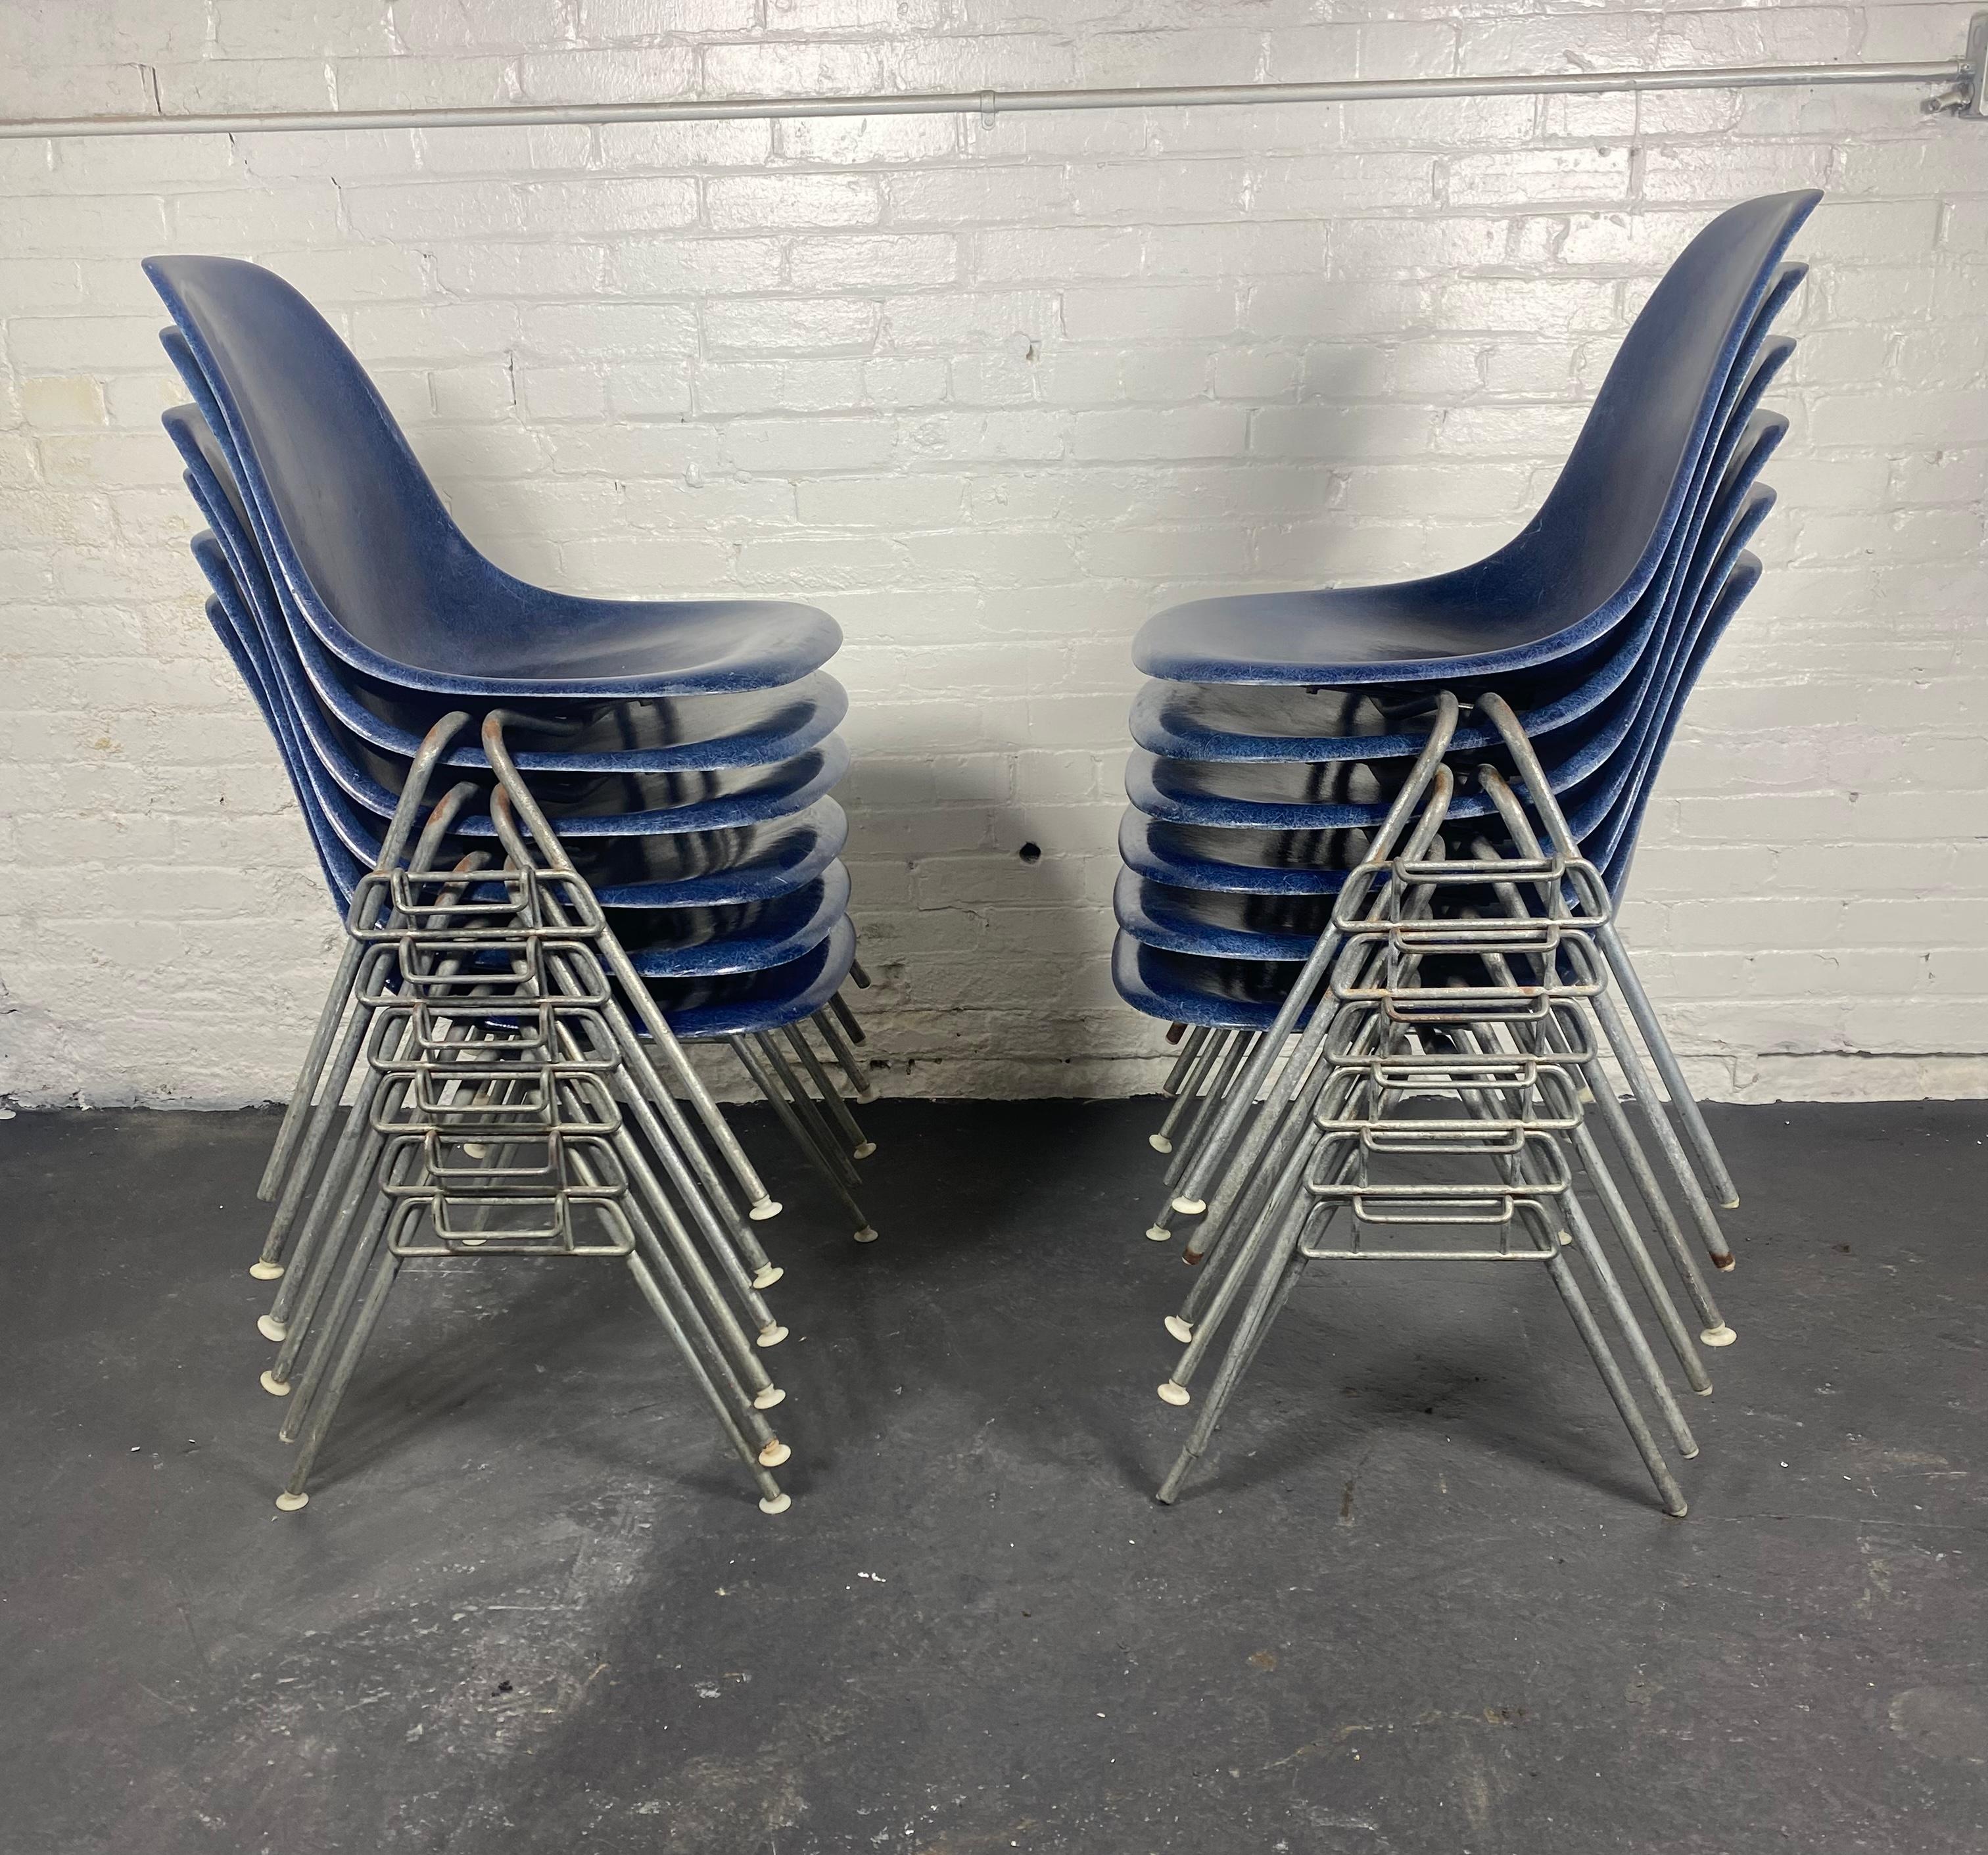 Metal 12 DSS Stacking Chairs Charles & Ray Eames Herman Miller, Blue Fiberglass, 1960s For Sale